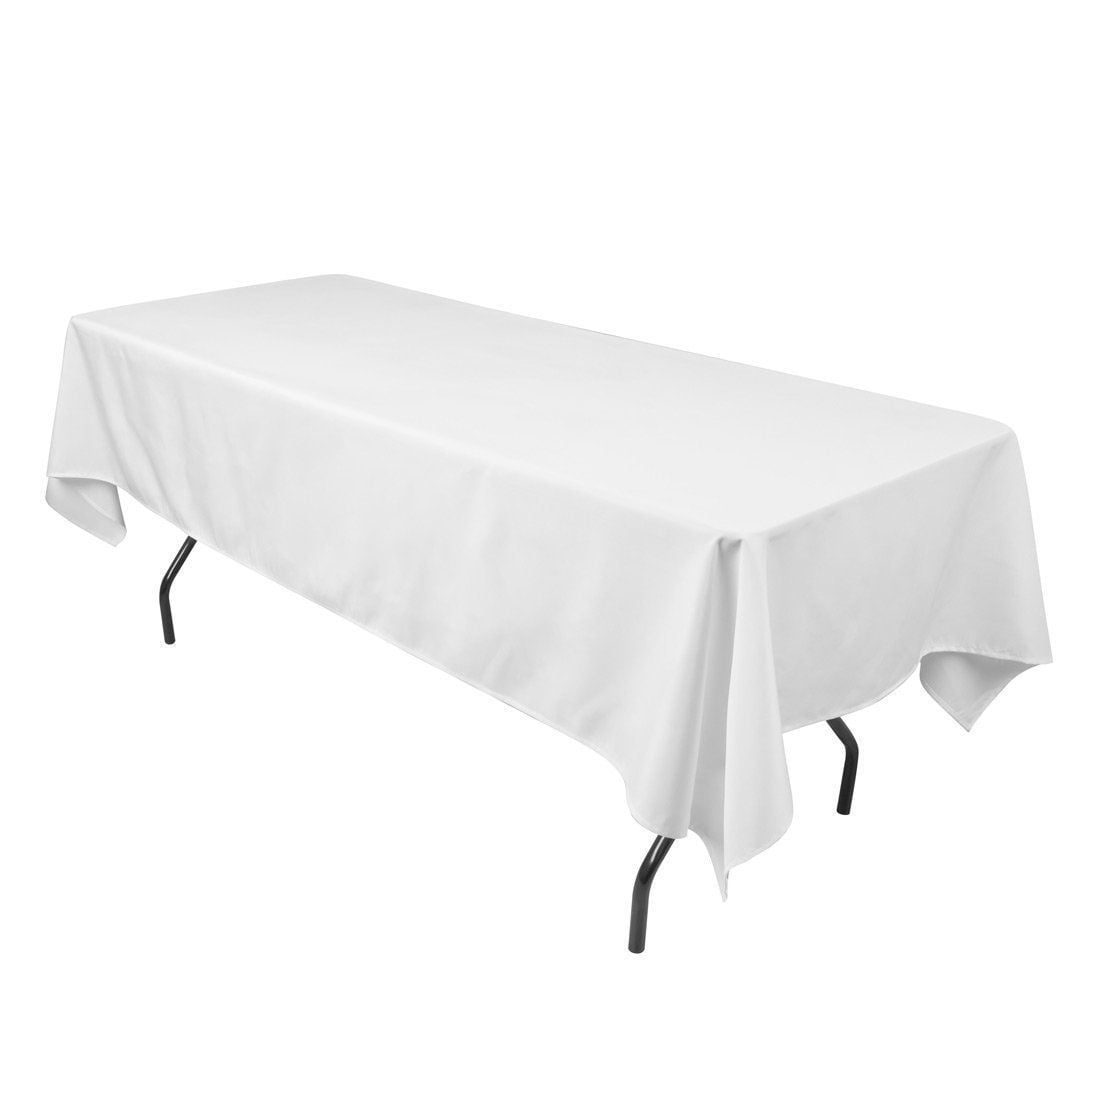 30 Rectangle 60"×126" Polyester Tablecloths 20 Colors 100% Seamless Made in USA 